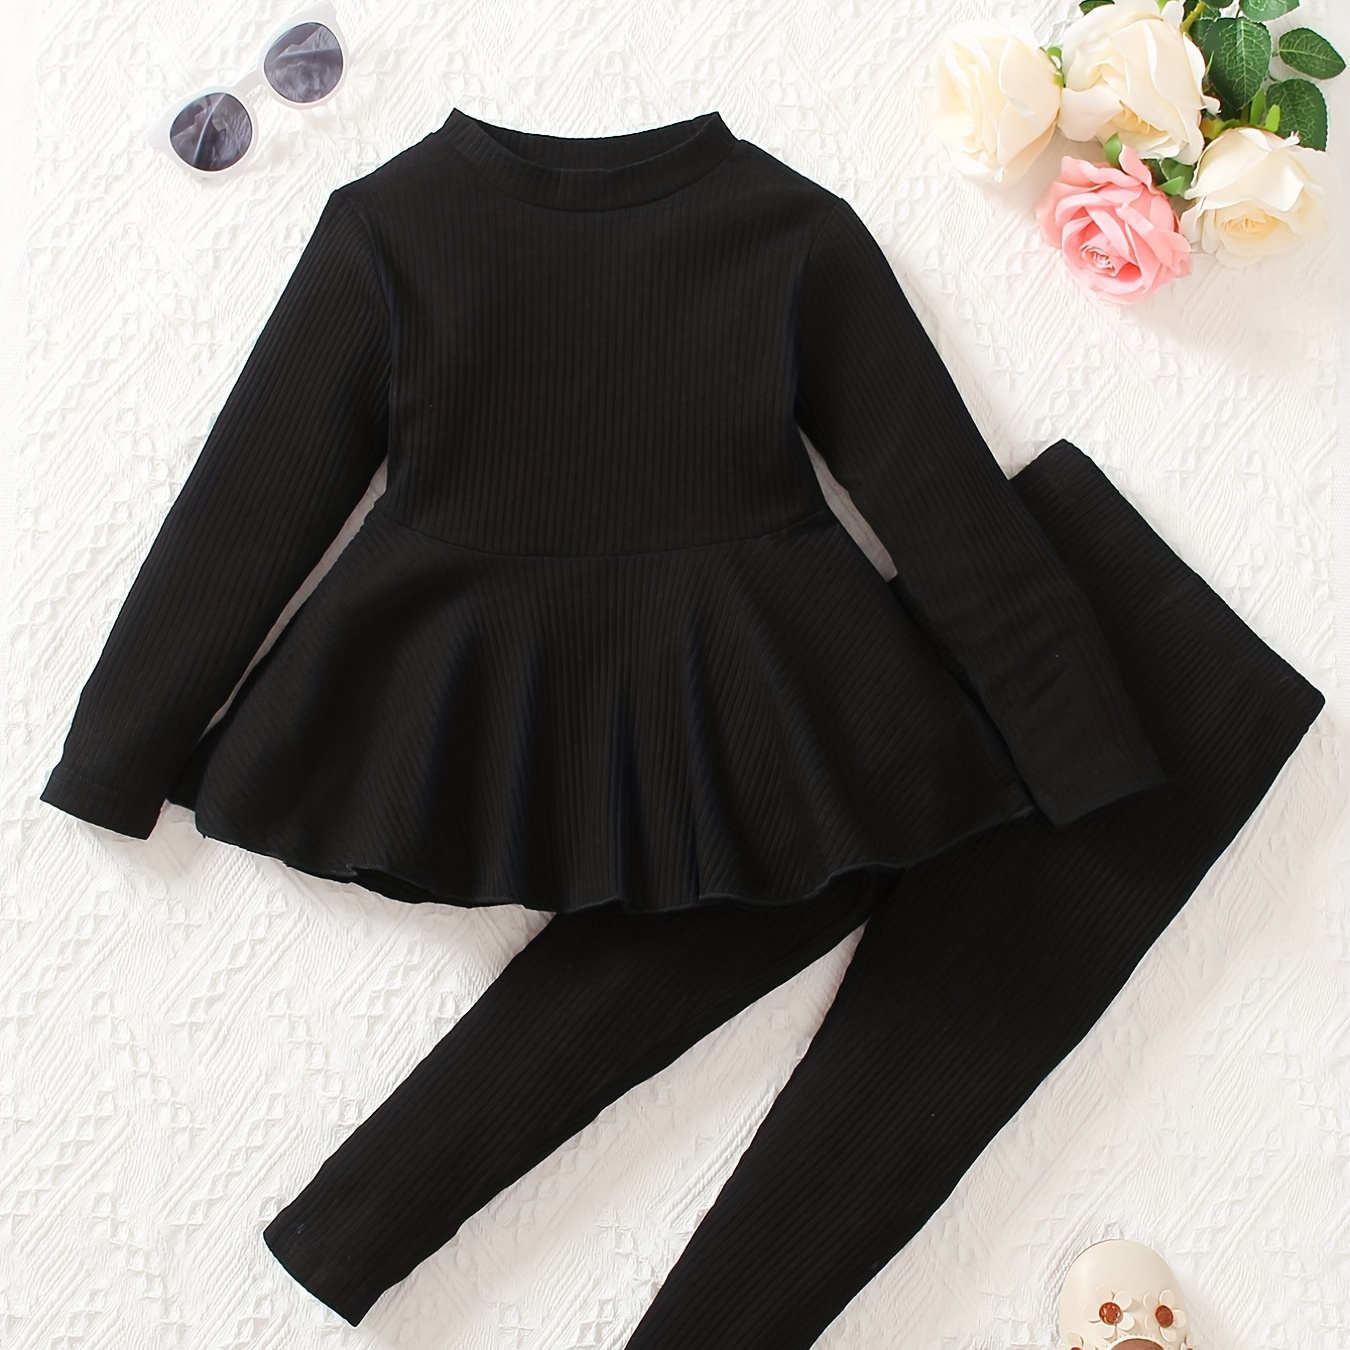 

Girls Round Neck Long Sleeve Pit Strip Top & Elastic Waist Legging Pants 2pcs Ruffle Casual Kids Clothes For Spring And Autumn